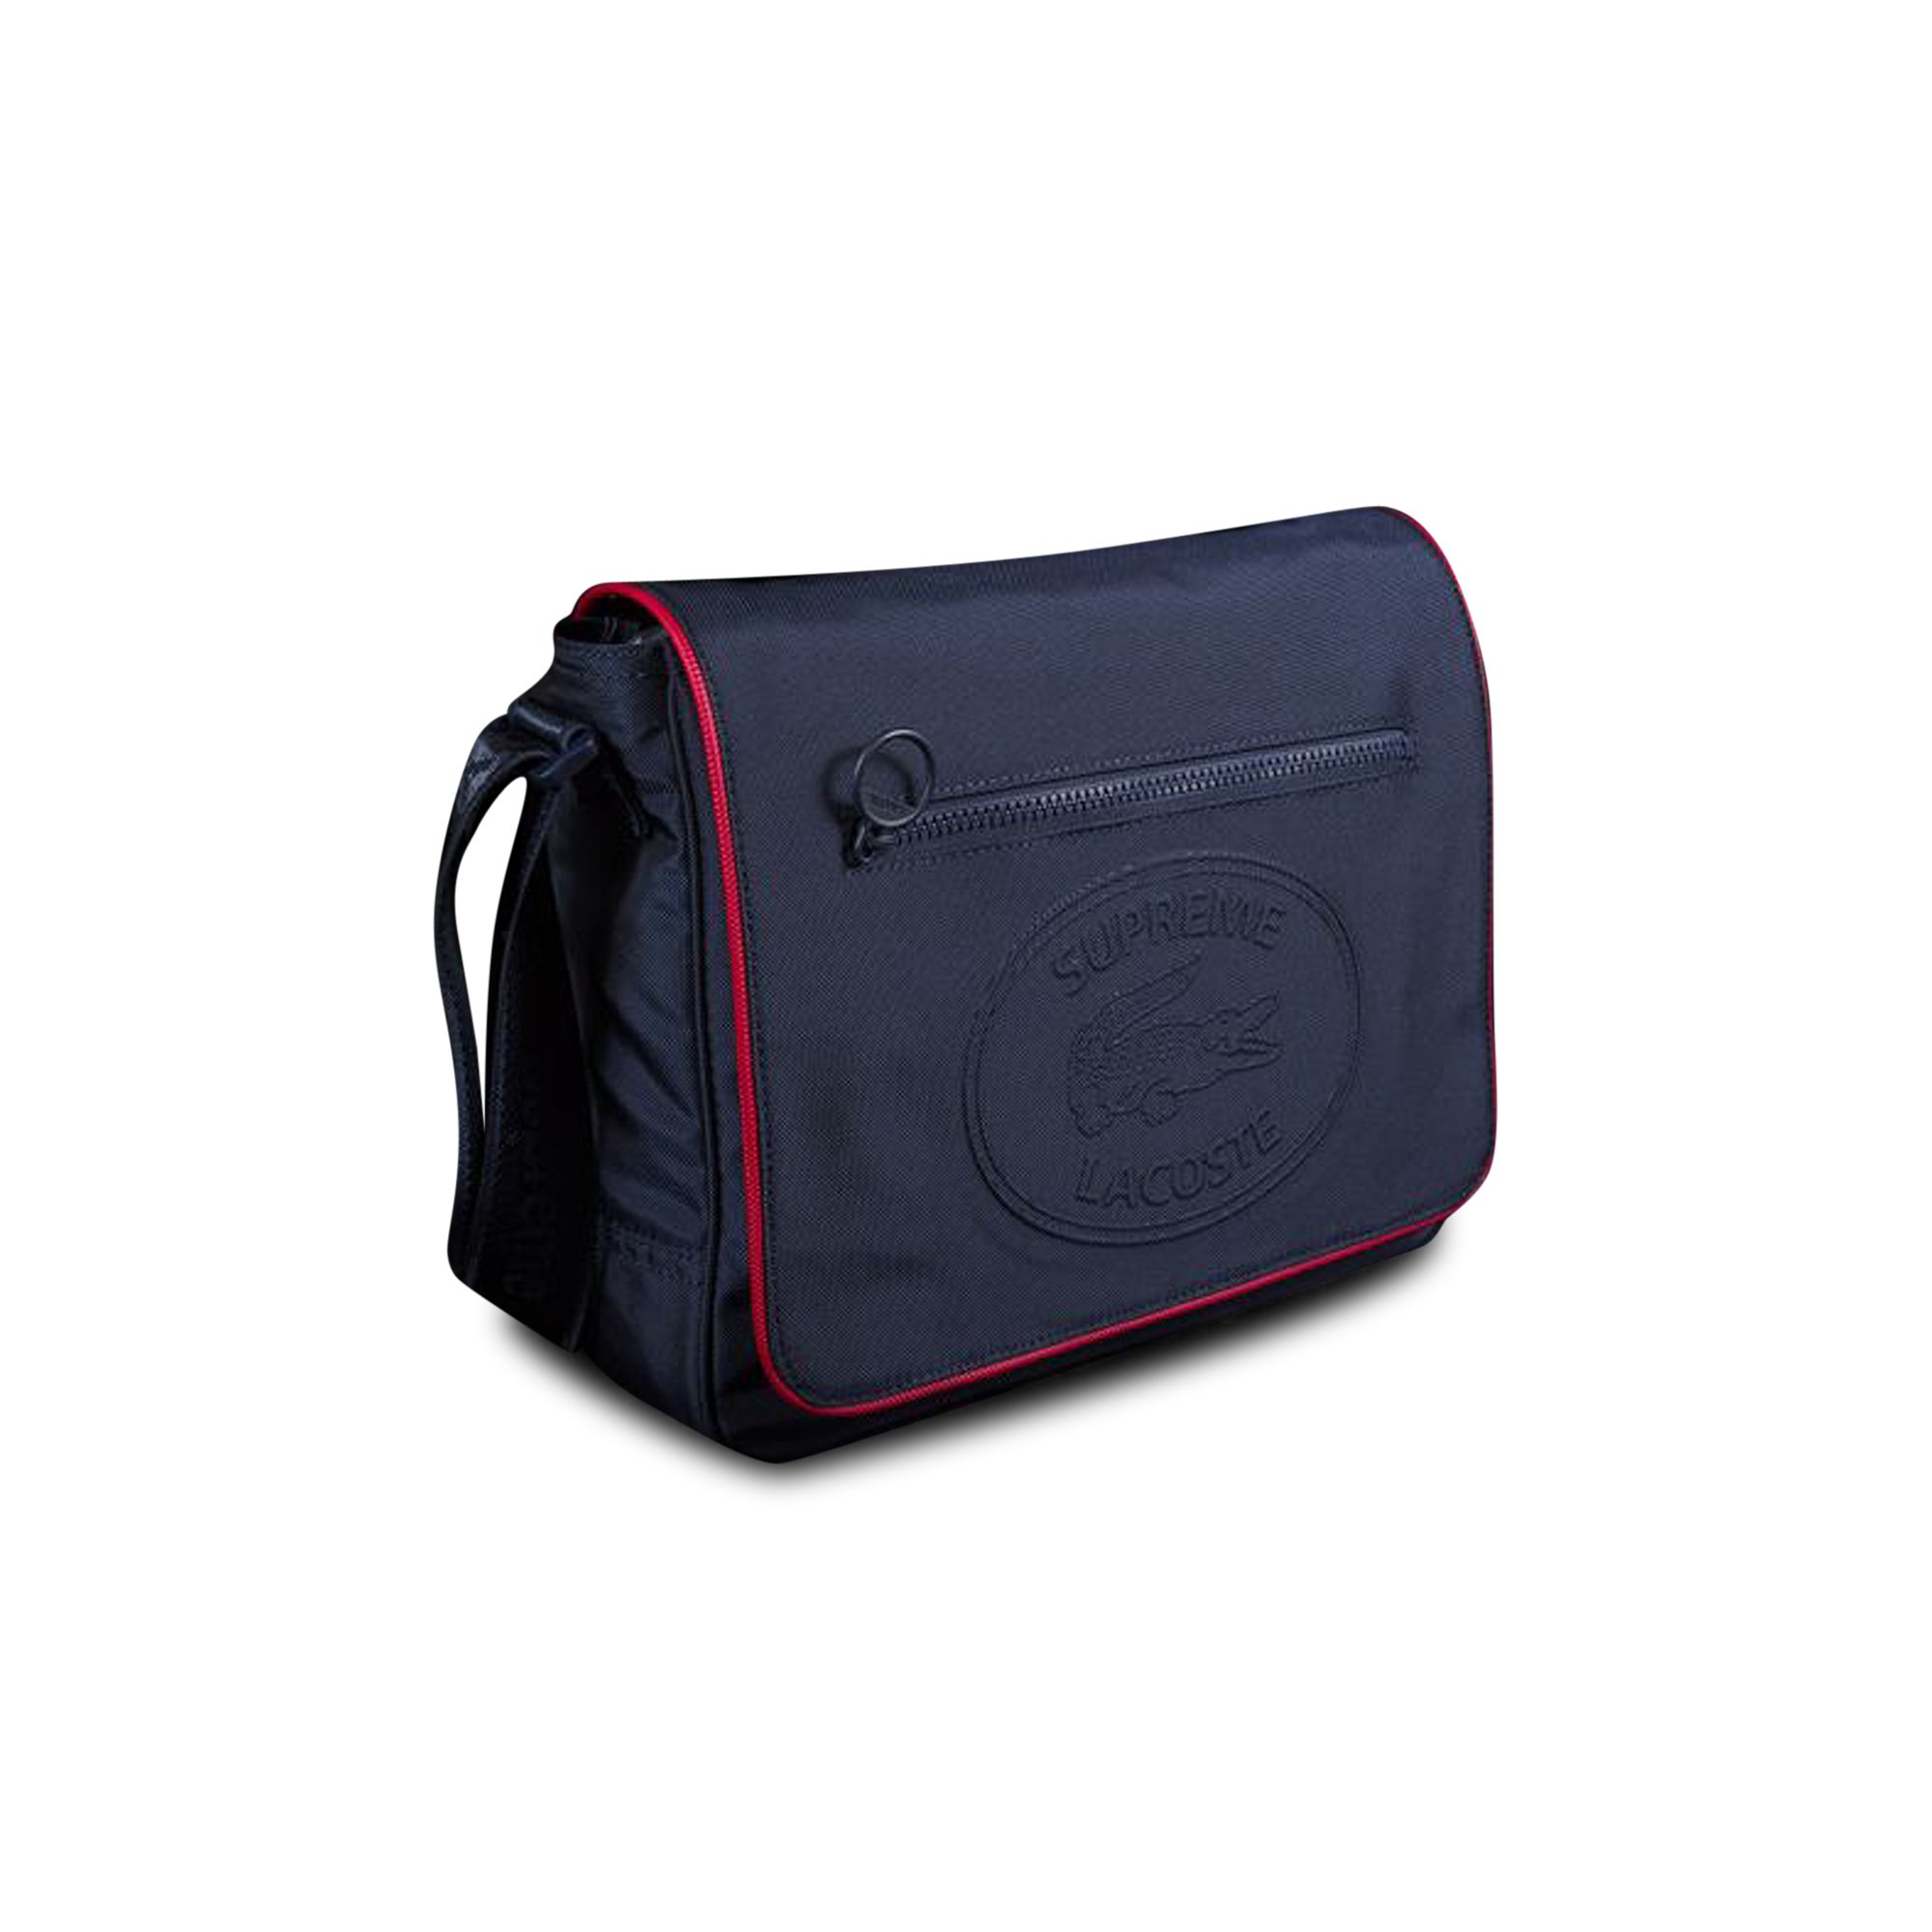 Buy Supreme x Lacoste Small Messenger Bag 'Navy' - FW19A14 NAVY | GOAT